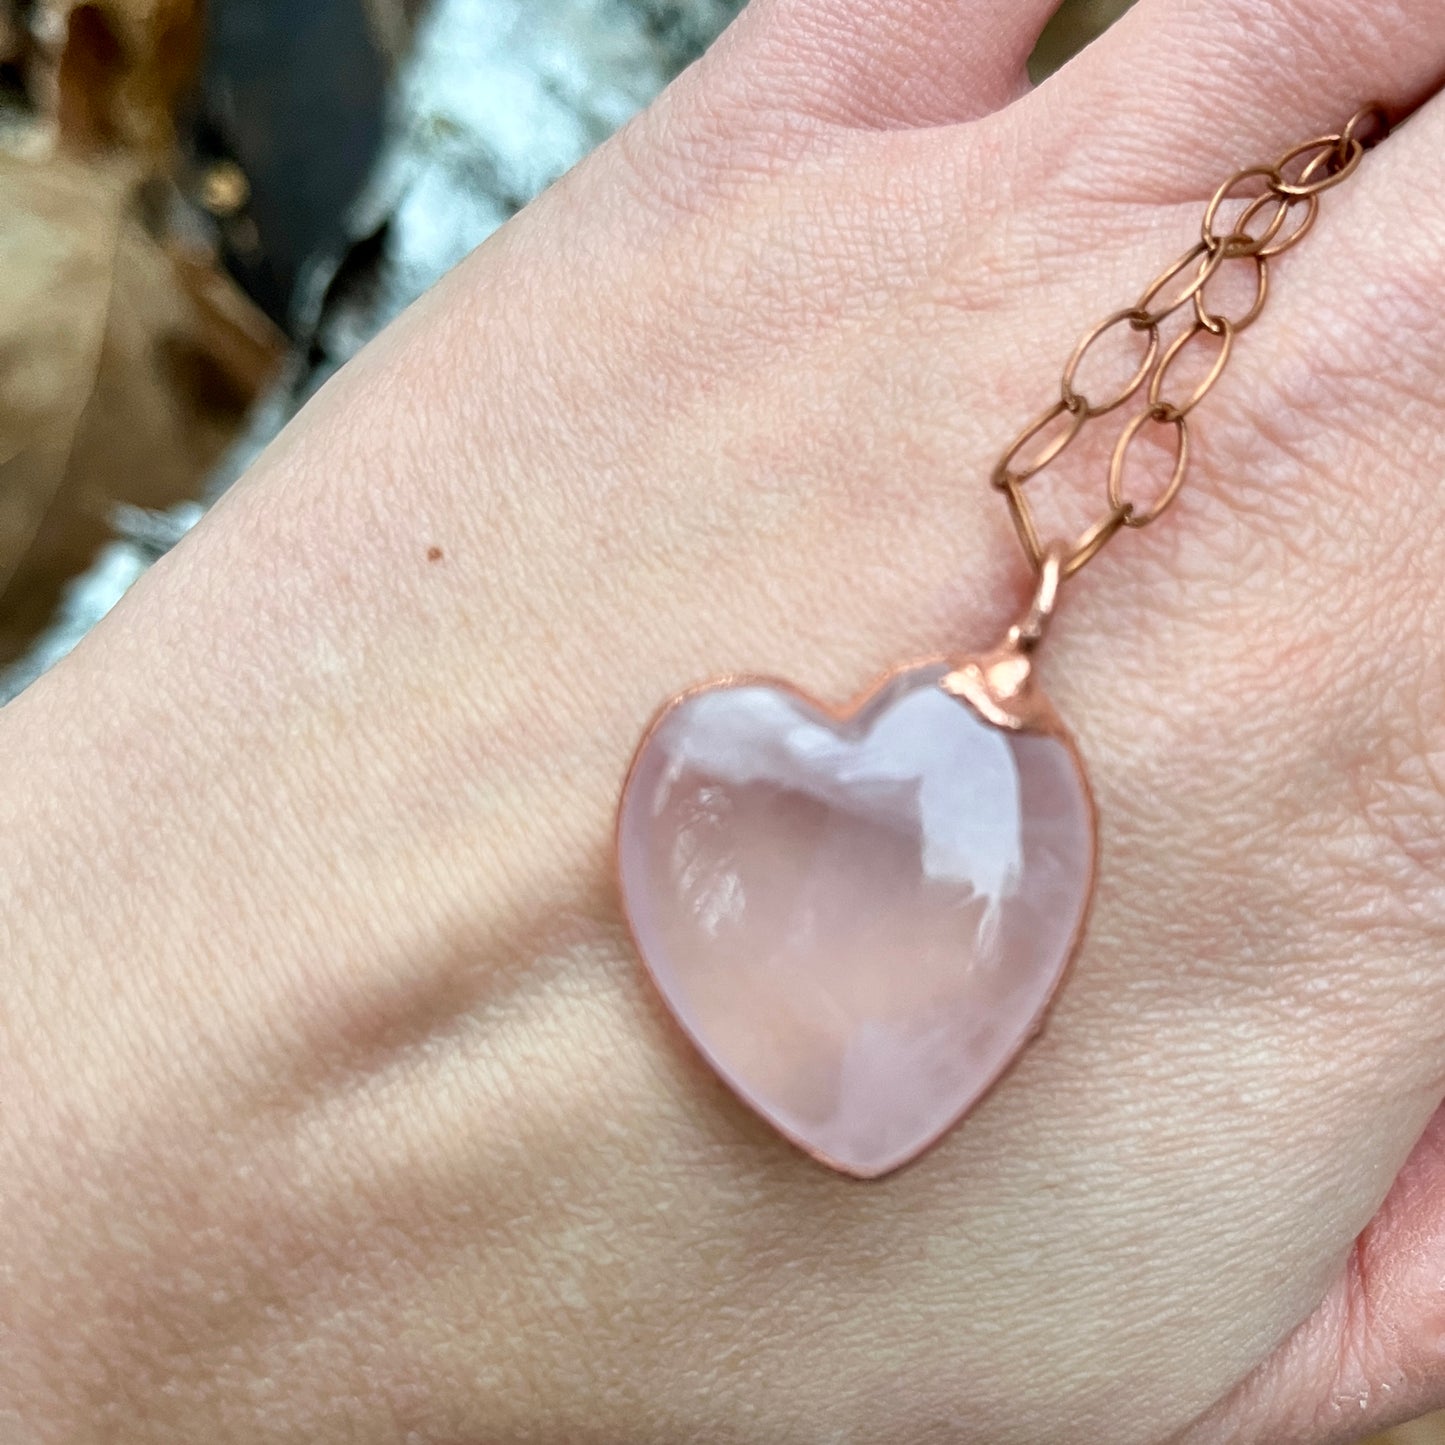 heart chakra rose quartz handmade necklace with a copper chain.